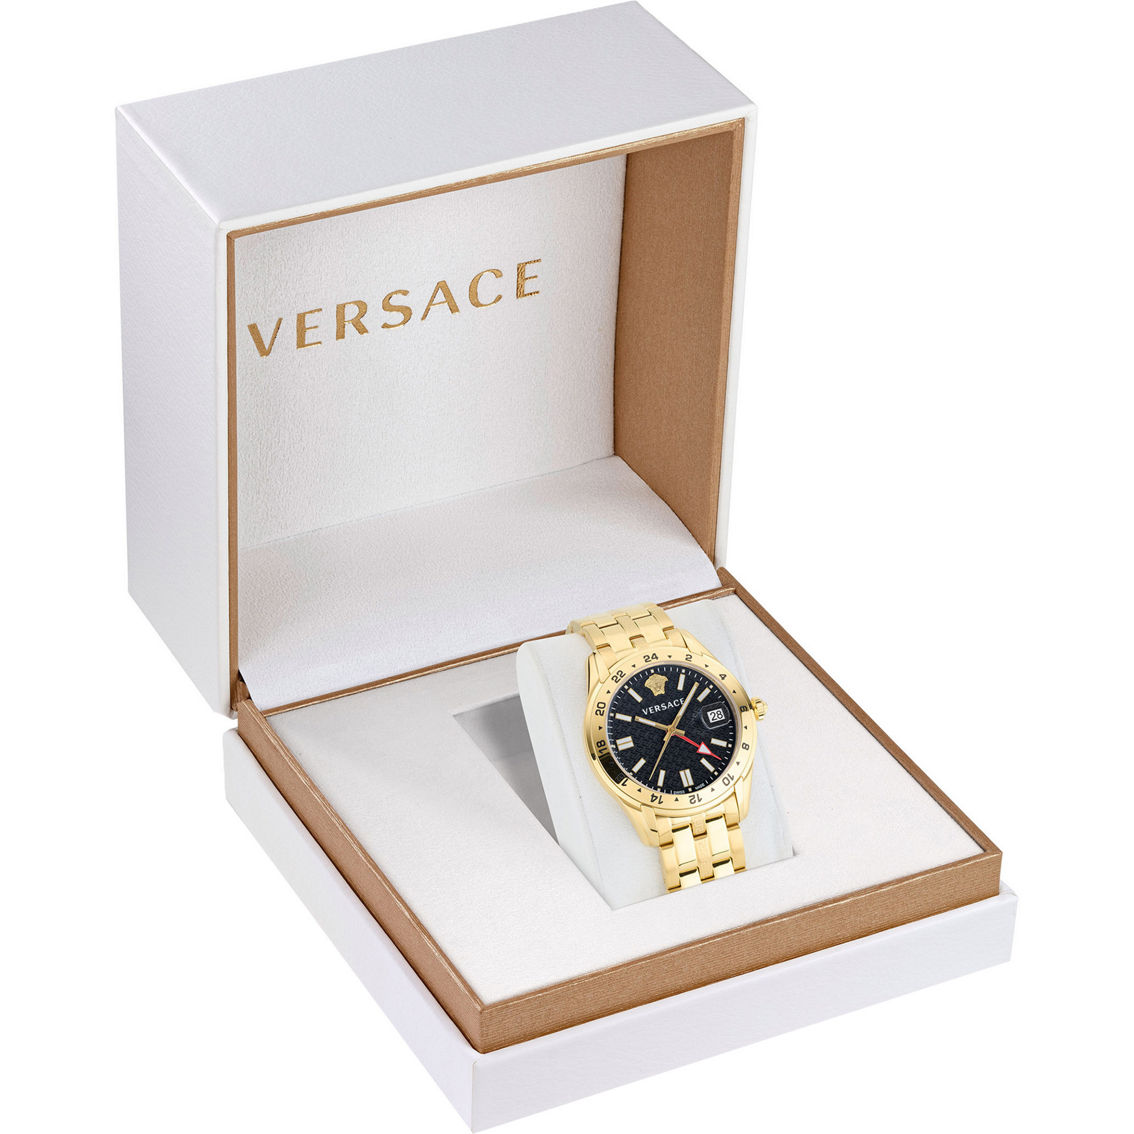 Time Versace Exchange Goldtone Band & Jewelry Yellow | | Men\'s Watches Shop Gold Ve7c00723 Ip | Greca Watch The